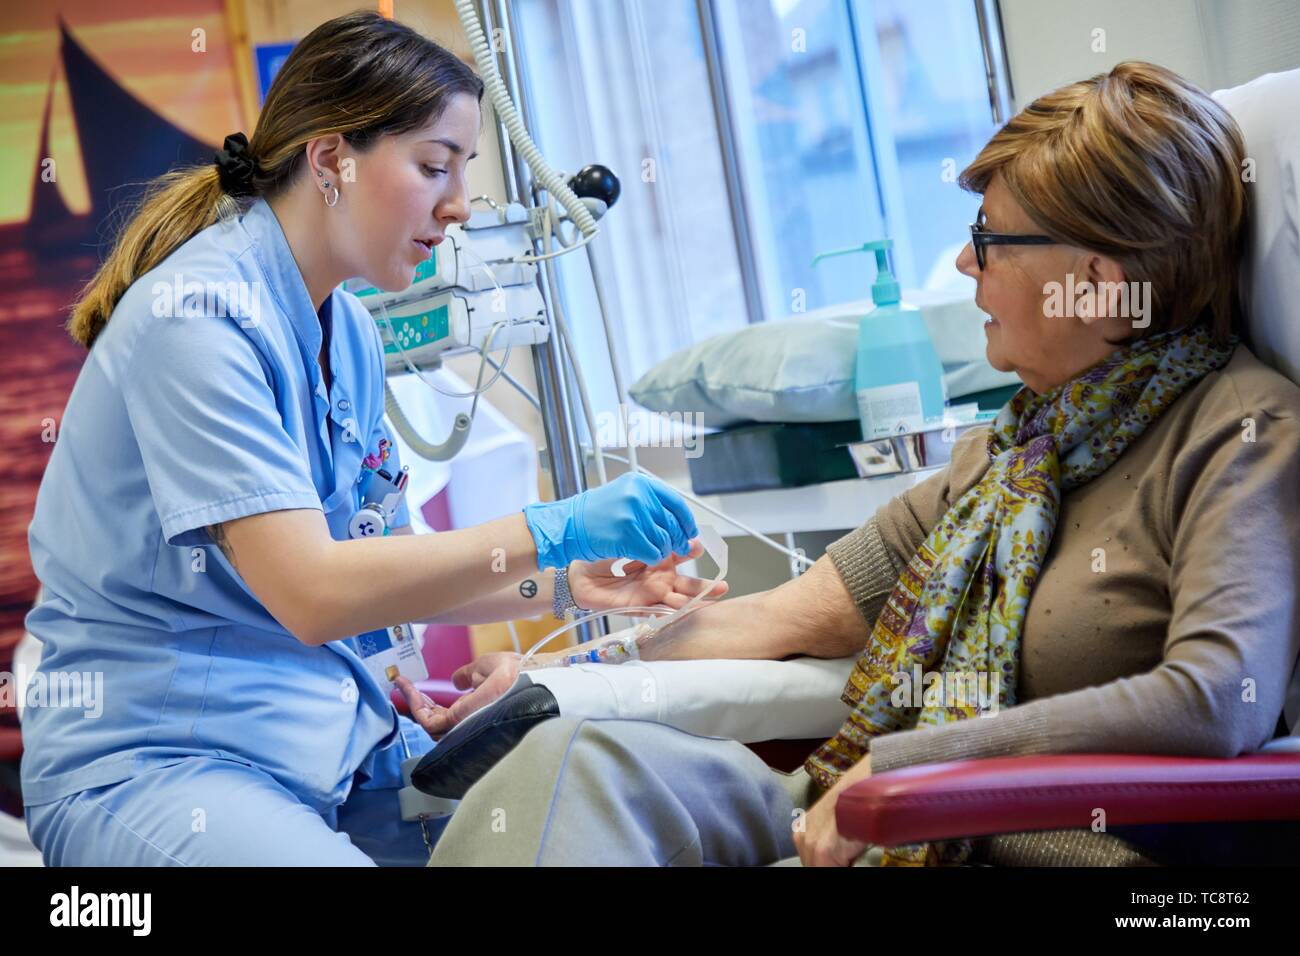 Chemotherapy Patient And Nurse High Resolution Stock Photography And Images Alamy